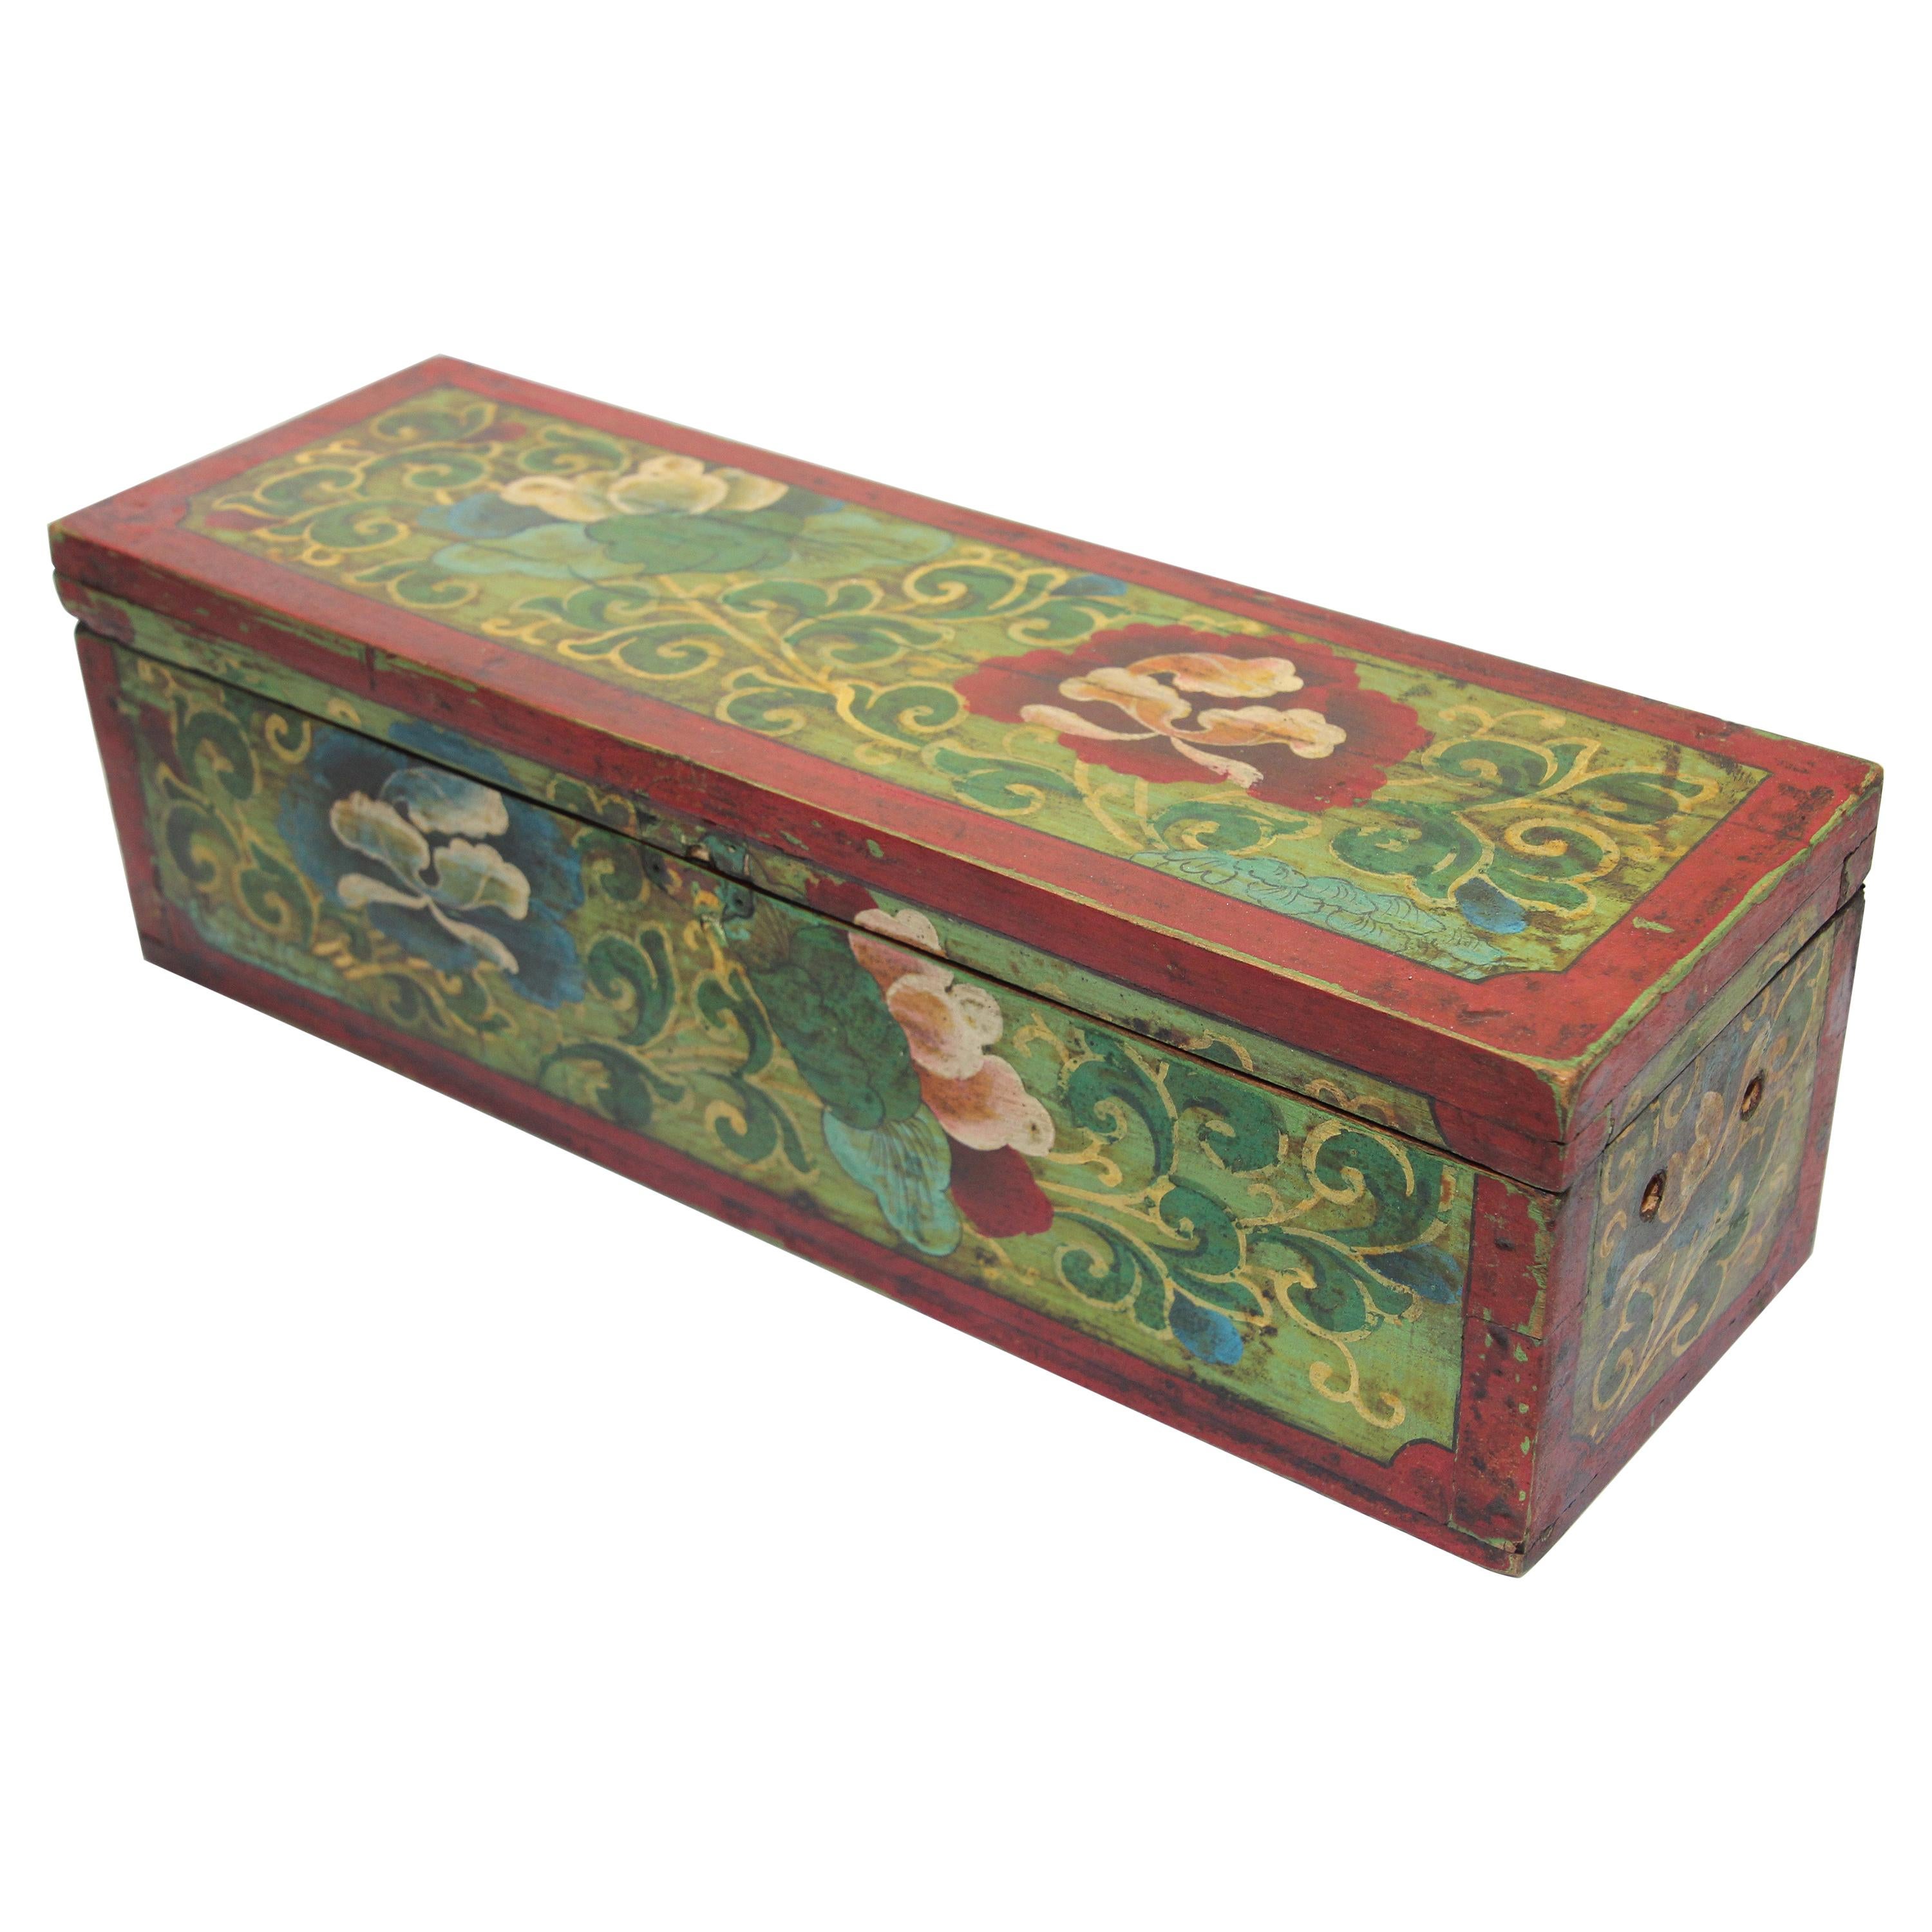 Tibetan Hand Painted Decorative Box with Floral Designs